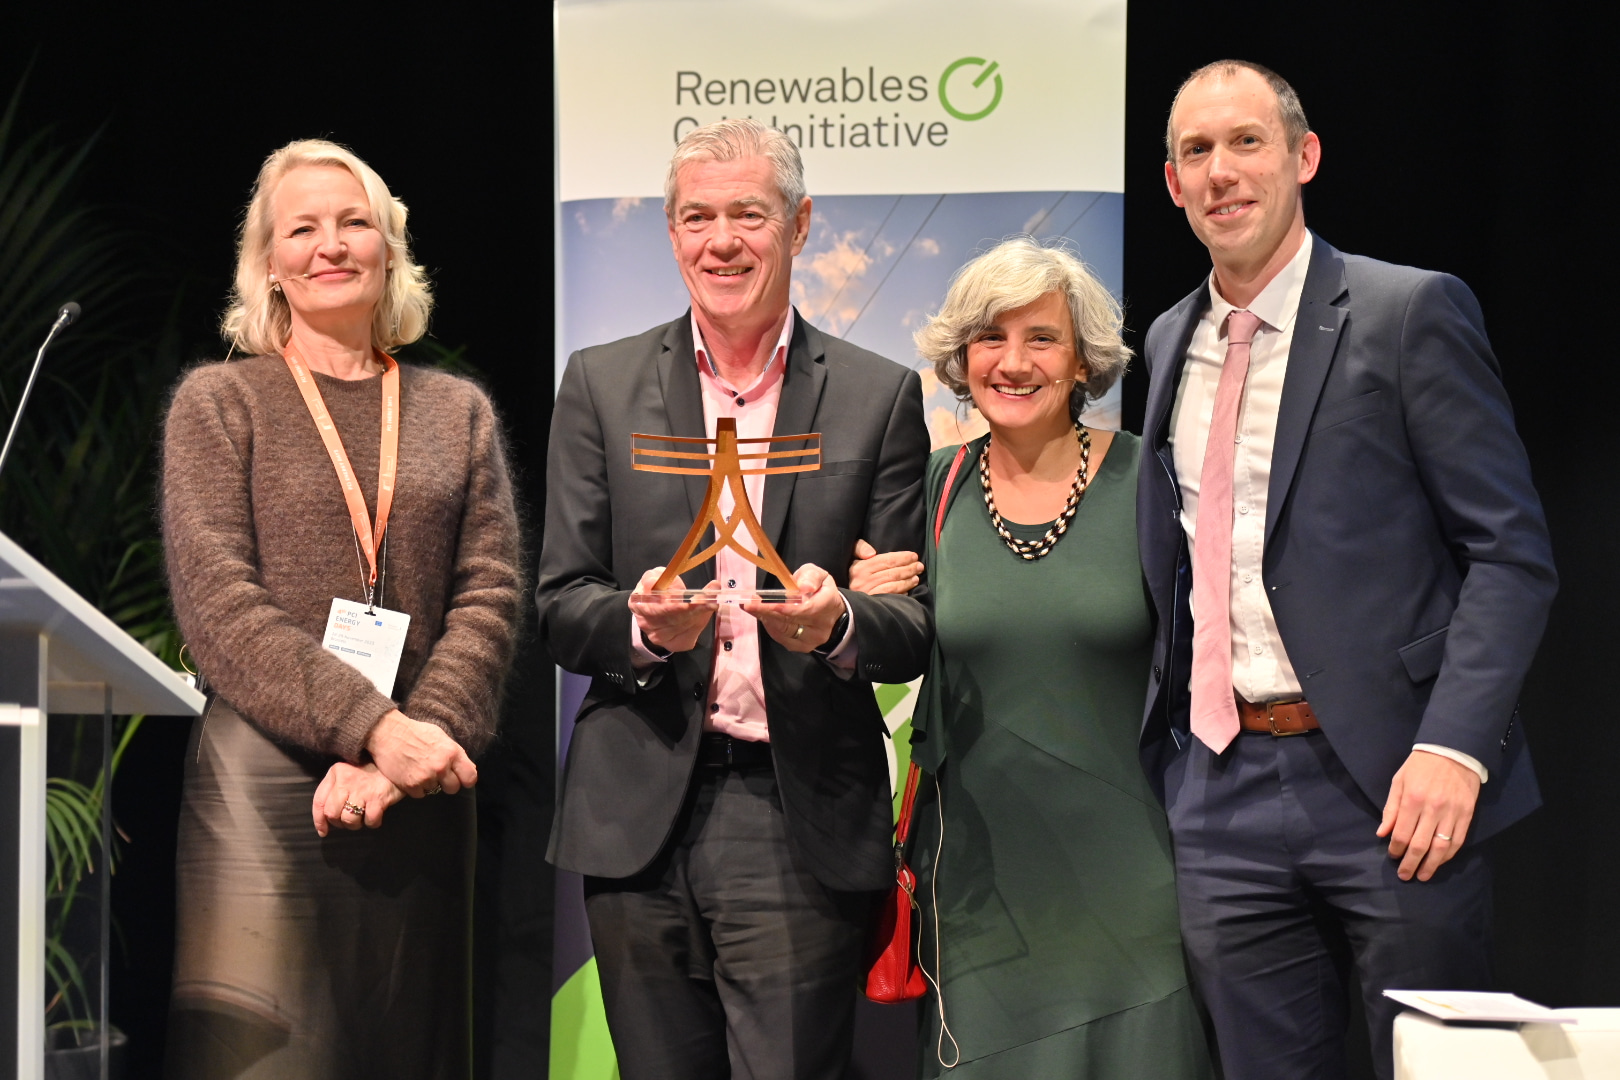 EirGrid CEO Mark Foley accepts a prize at the Renewables Grid Initiative Awards